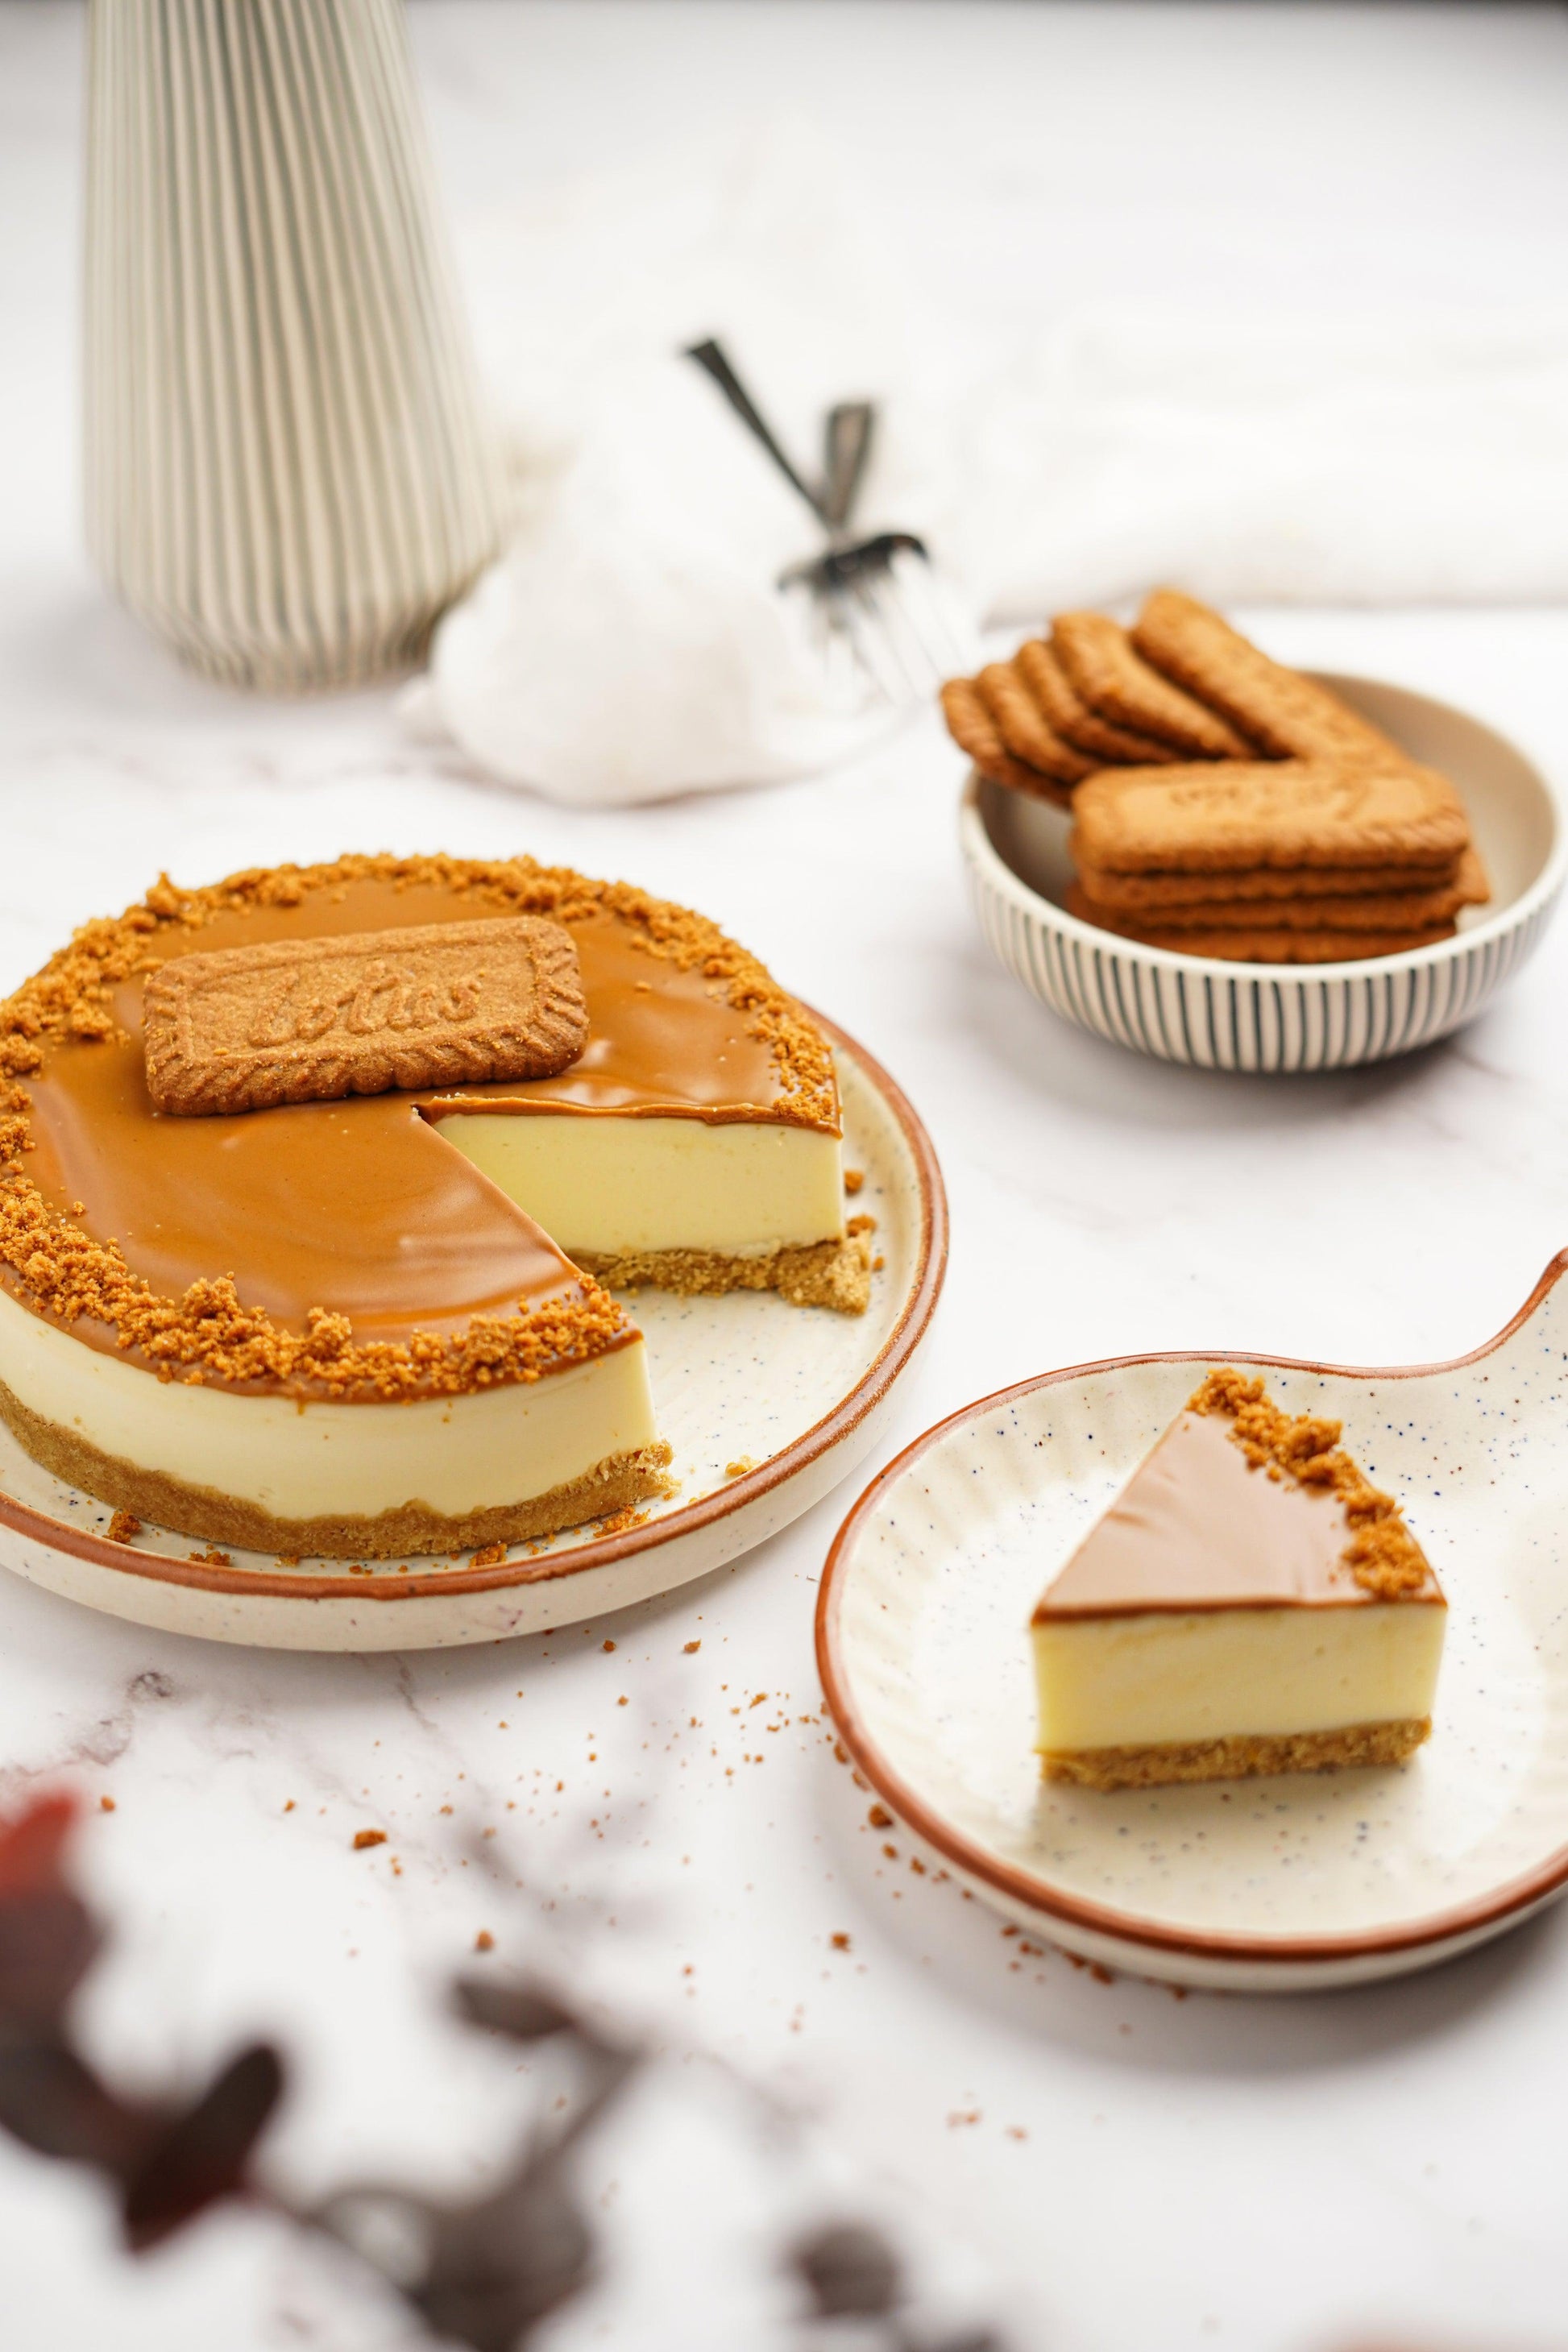 Lotus Biscoff Chilled Cheese Cake